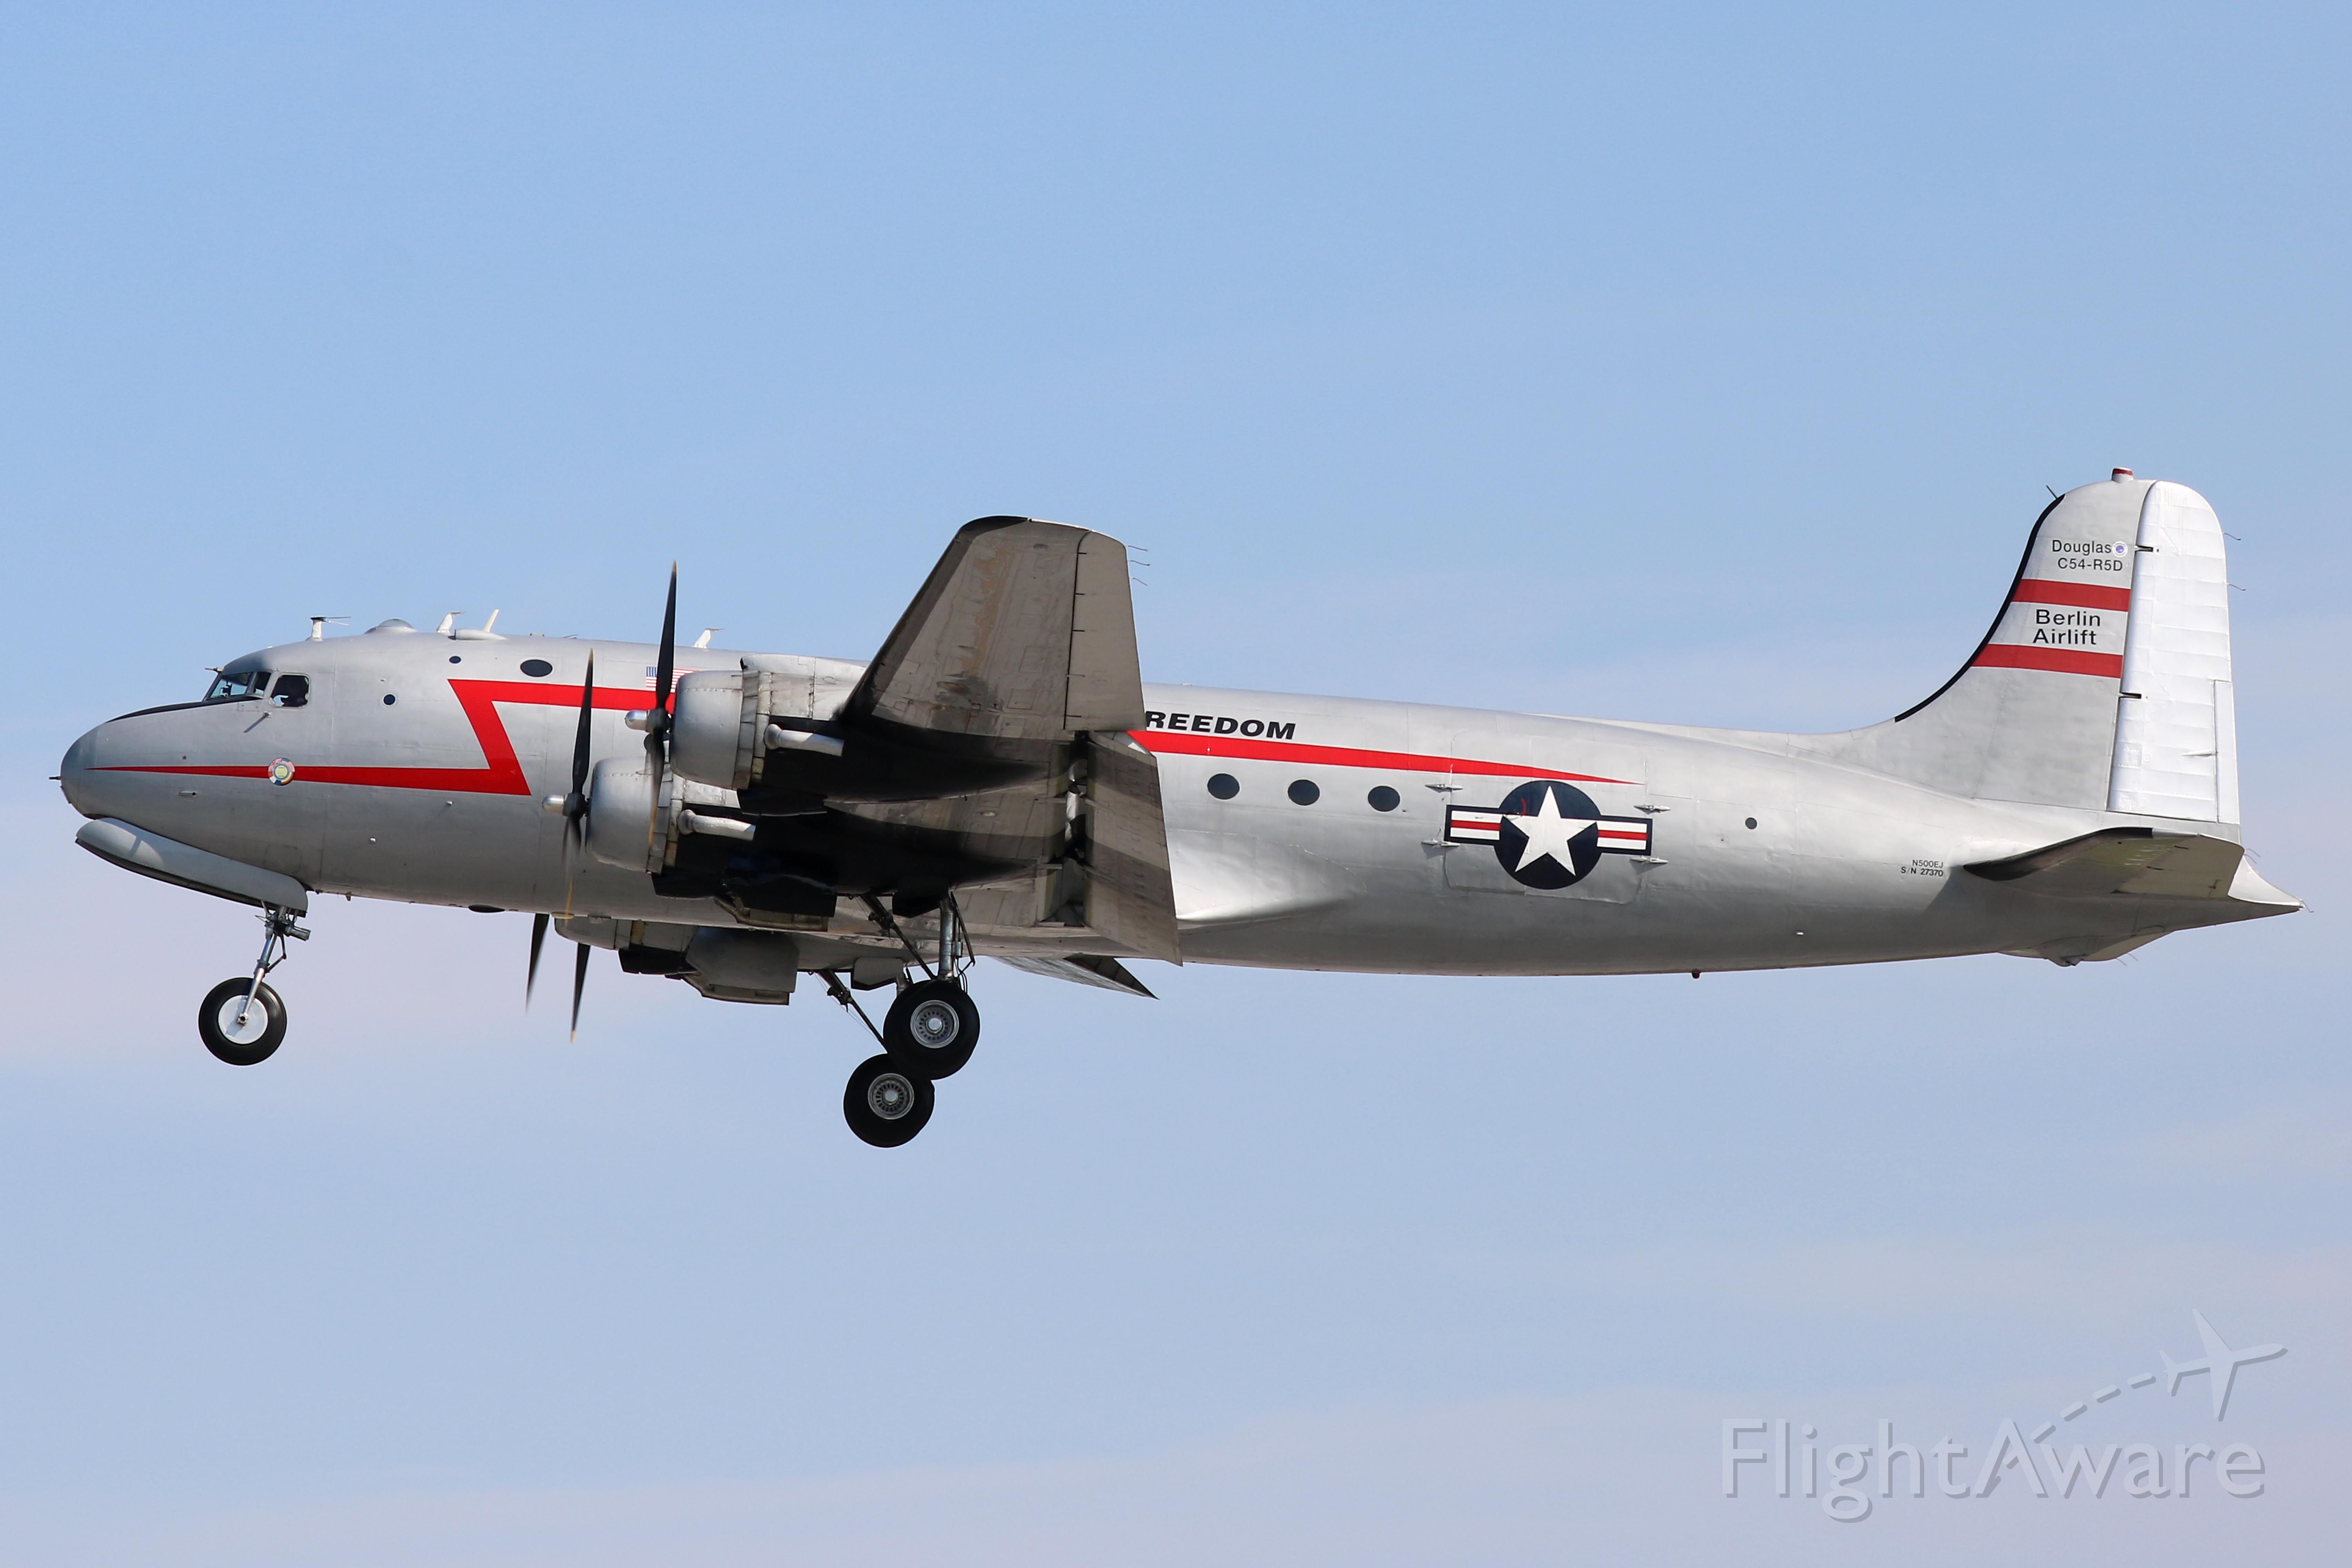 Douglas C-54 Skymaster (N500EJ) - Spirit of Freedom, a 1945 Douglas C-54E, owned by The Berlin Airlift Historical Foundation, seen on 15 Jul 2019.